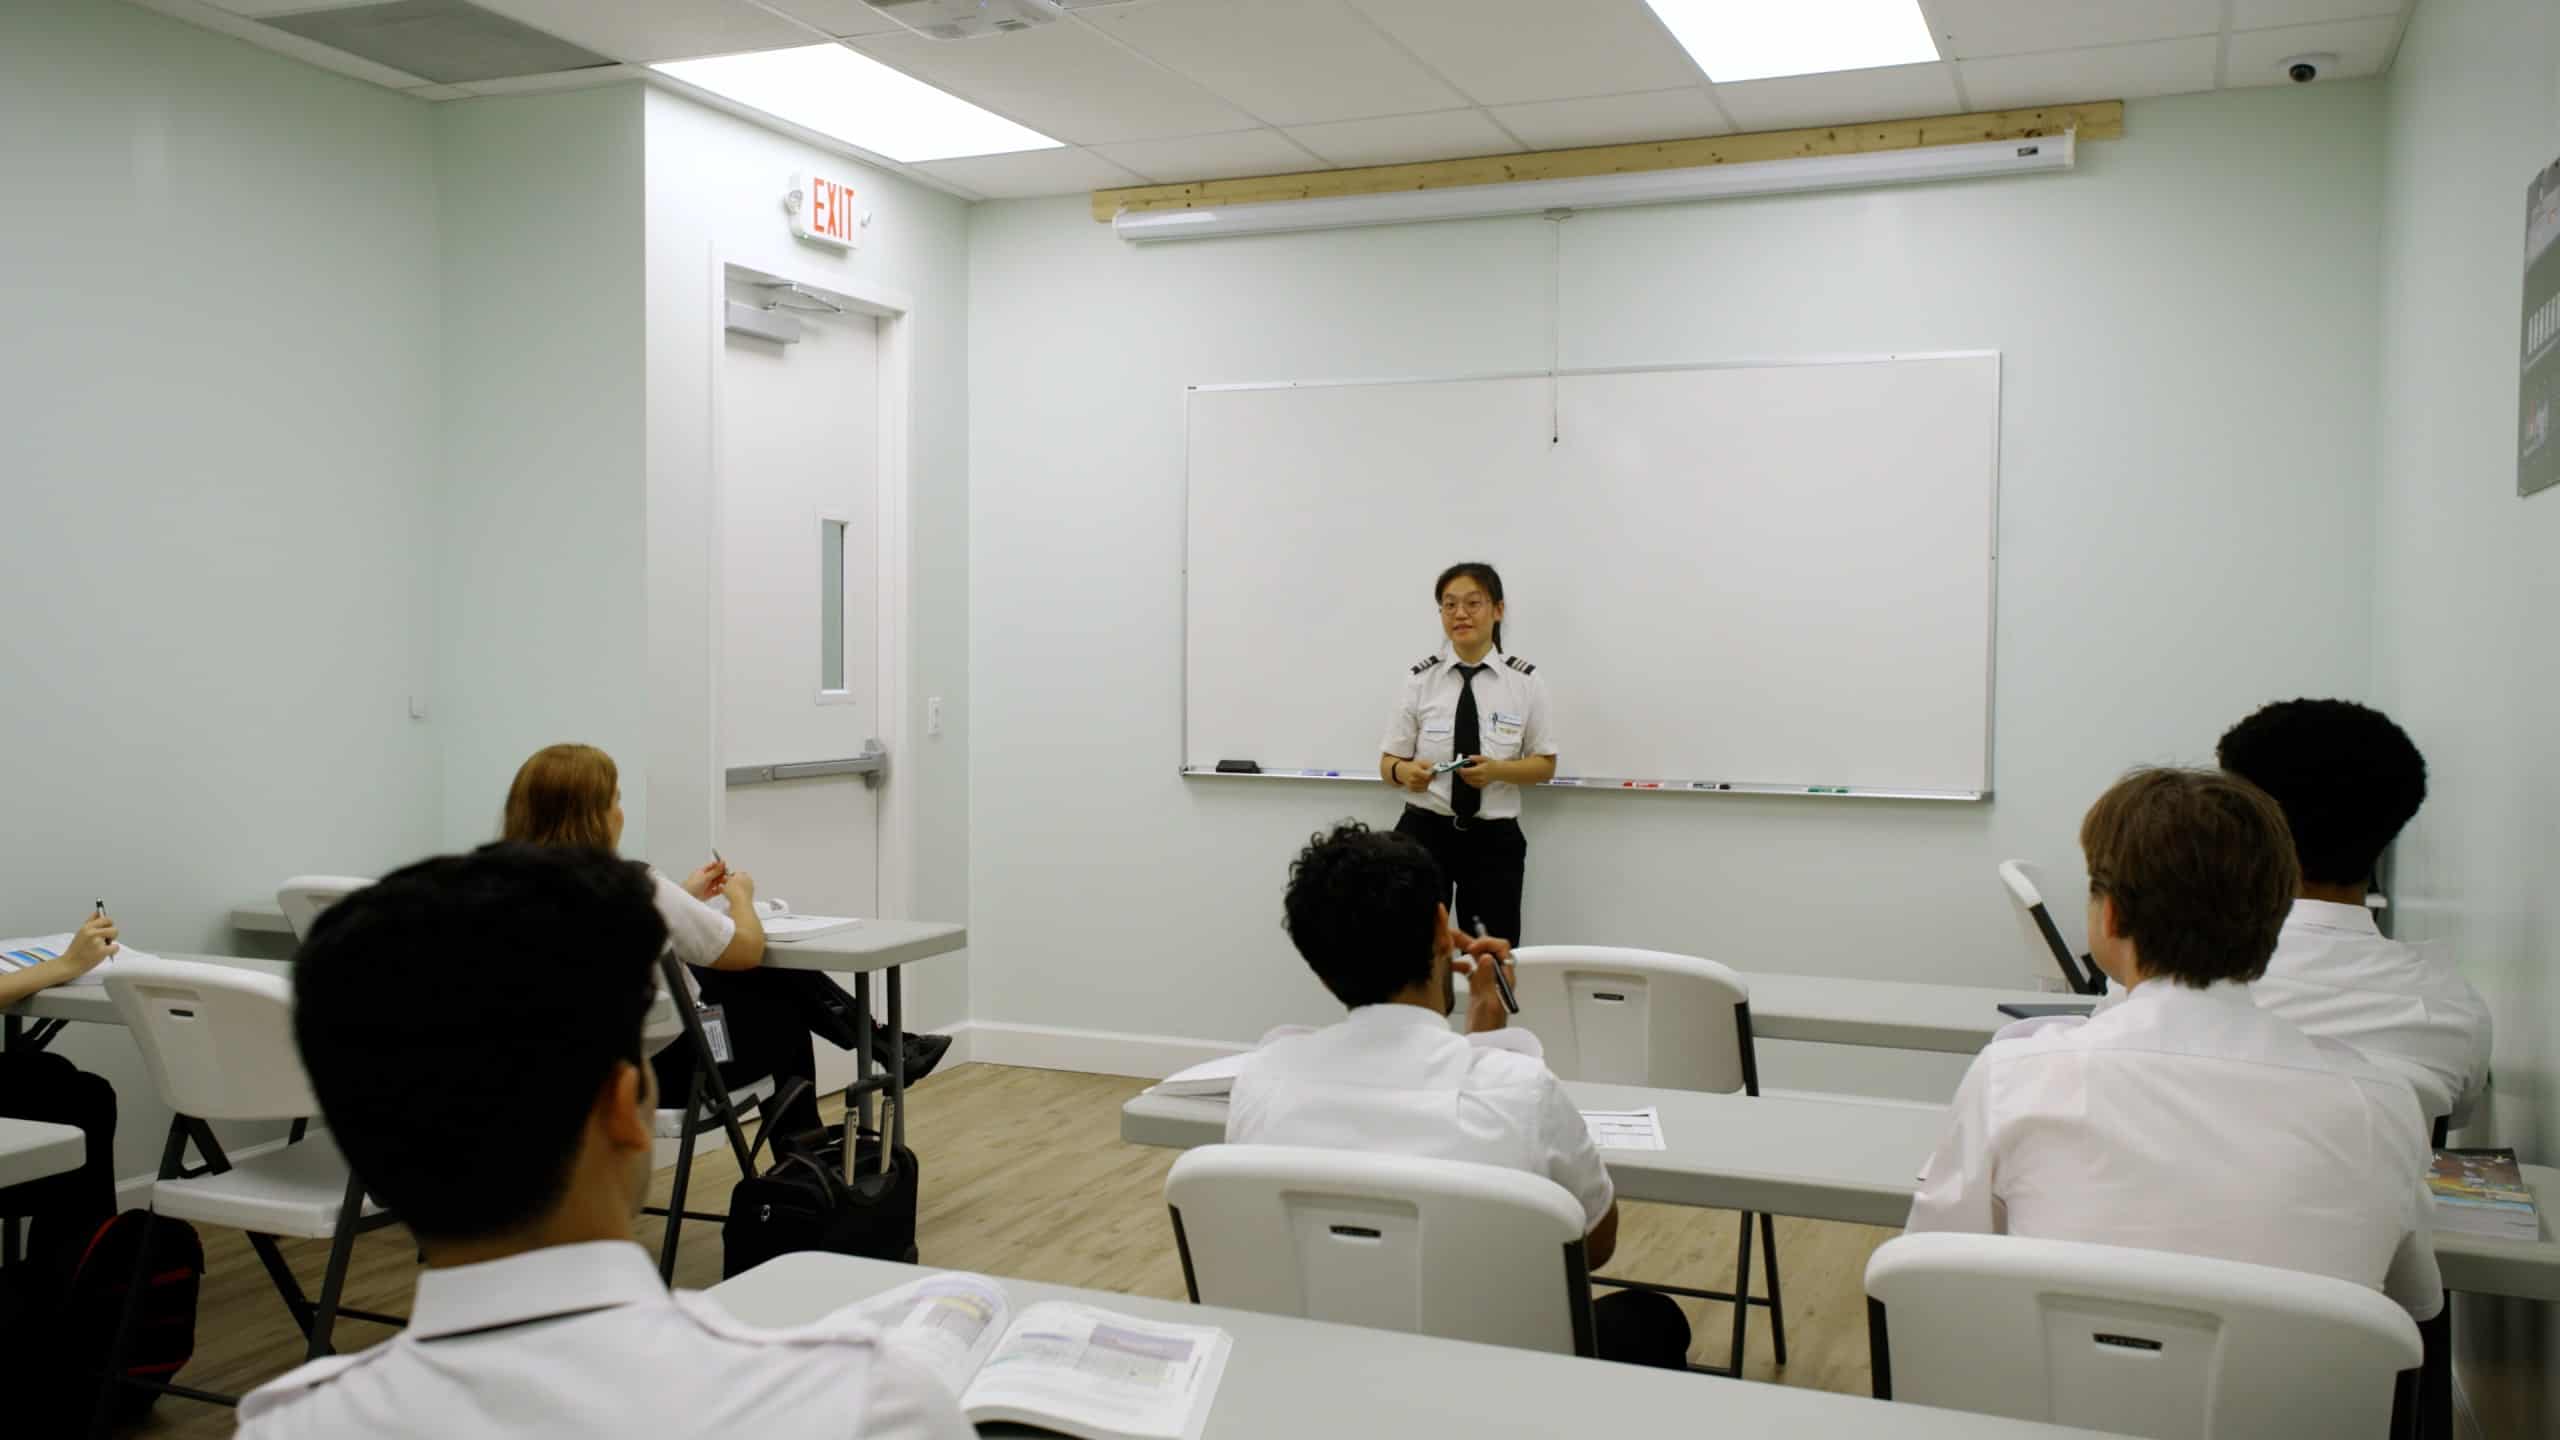 A Paris Air instructor in front of a classroom